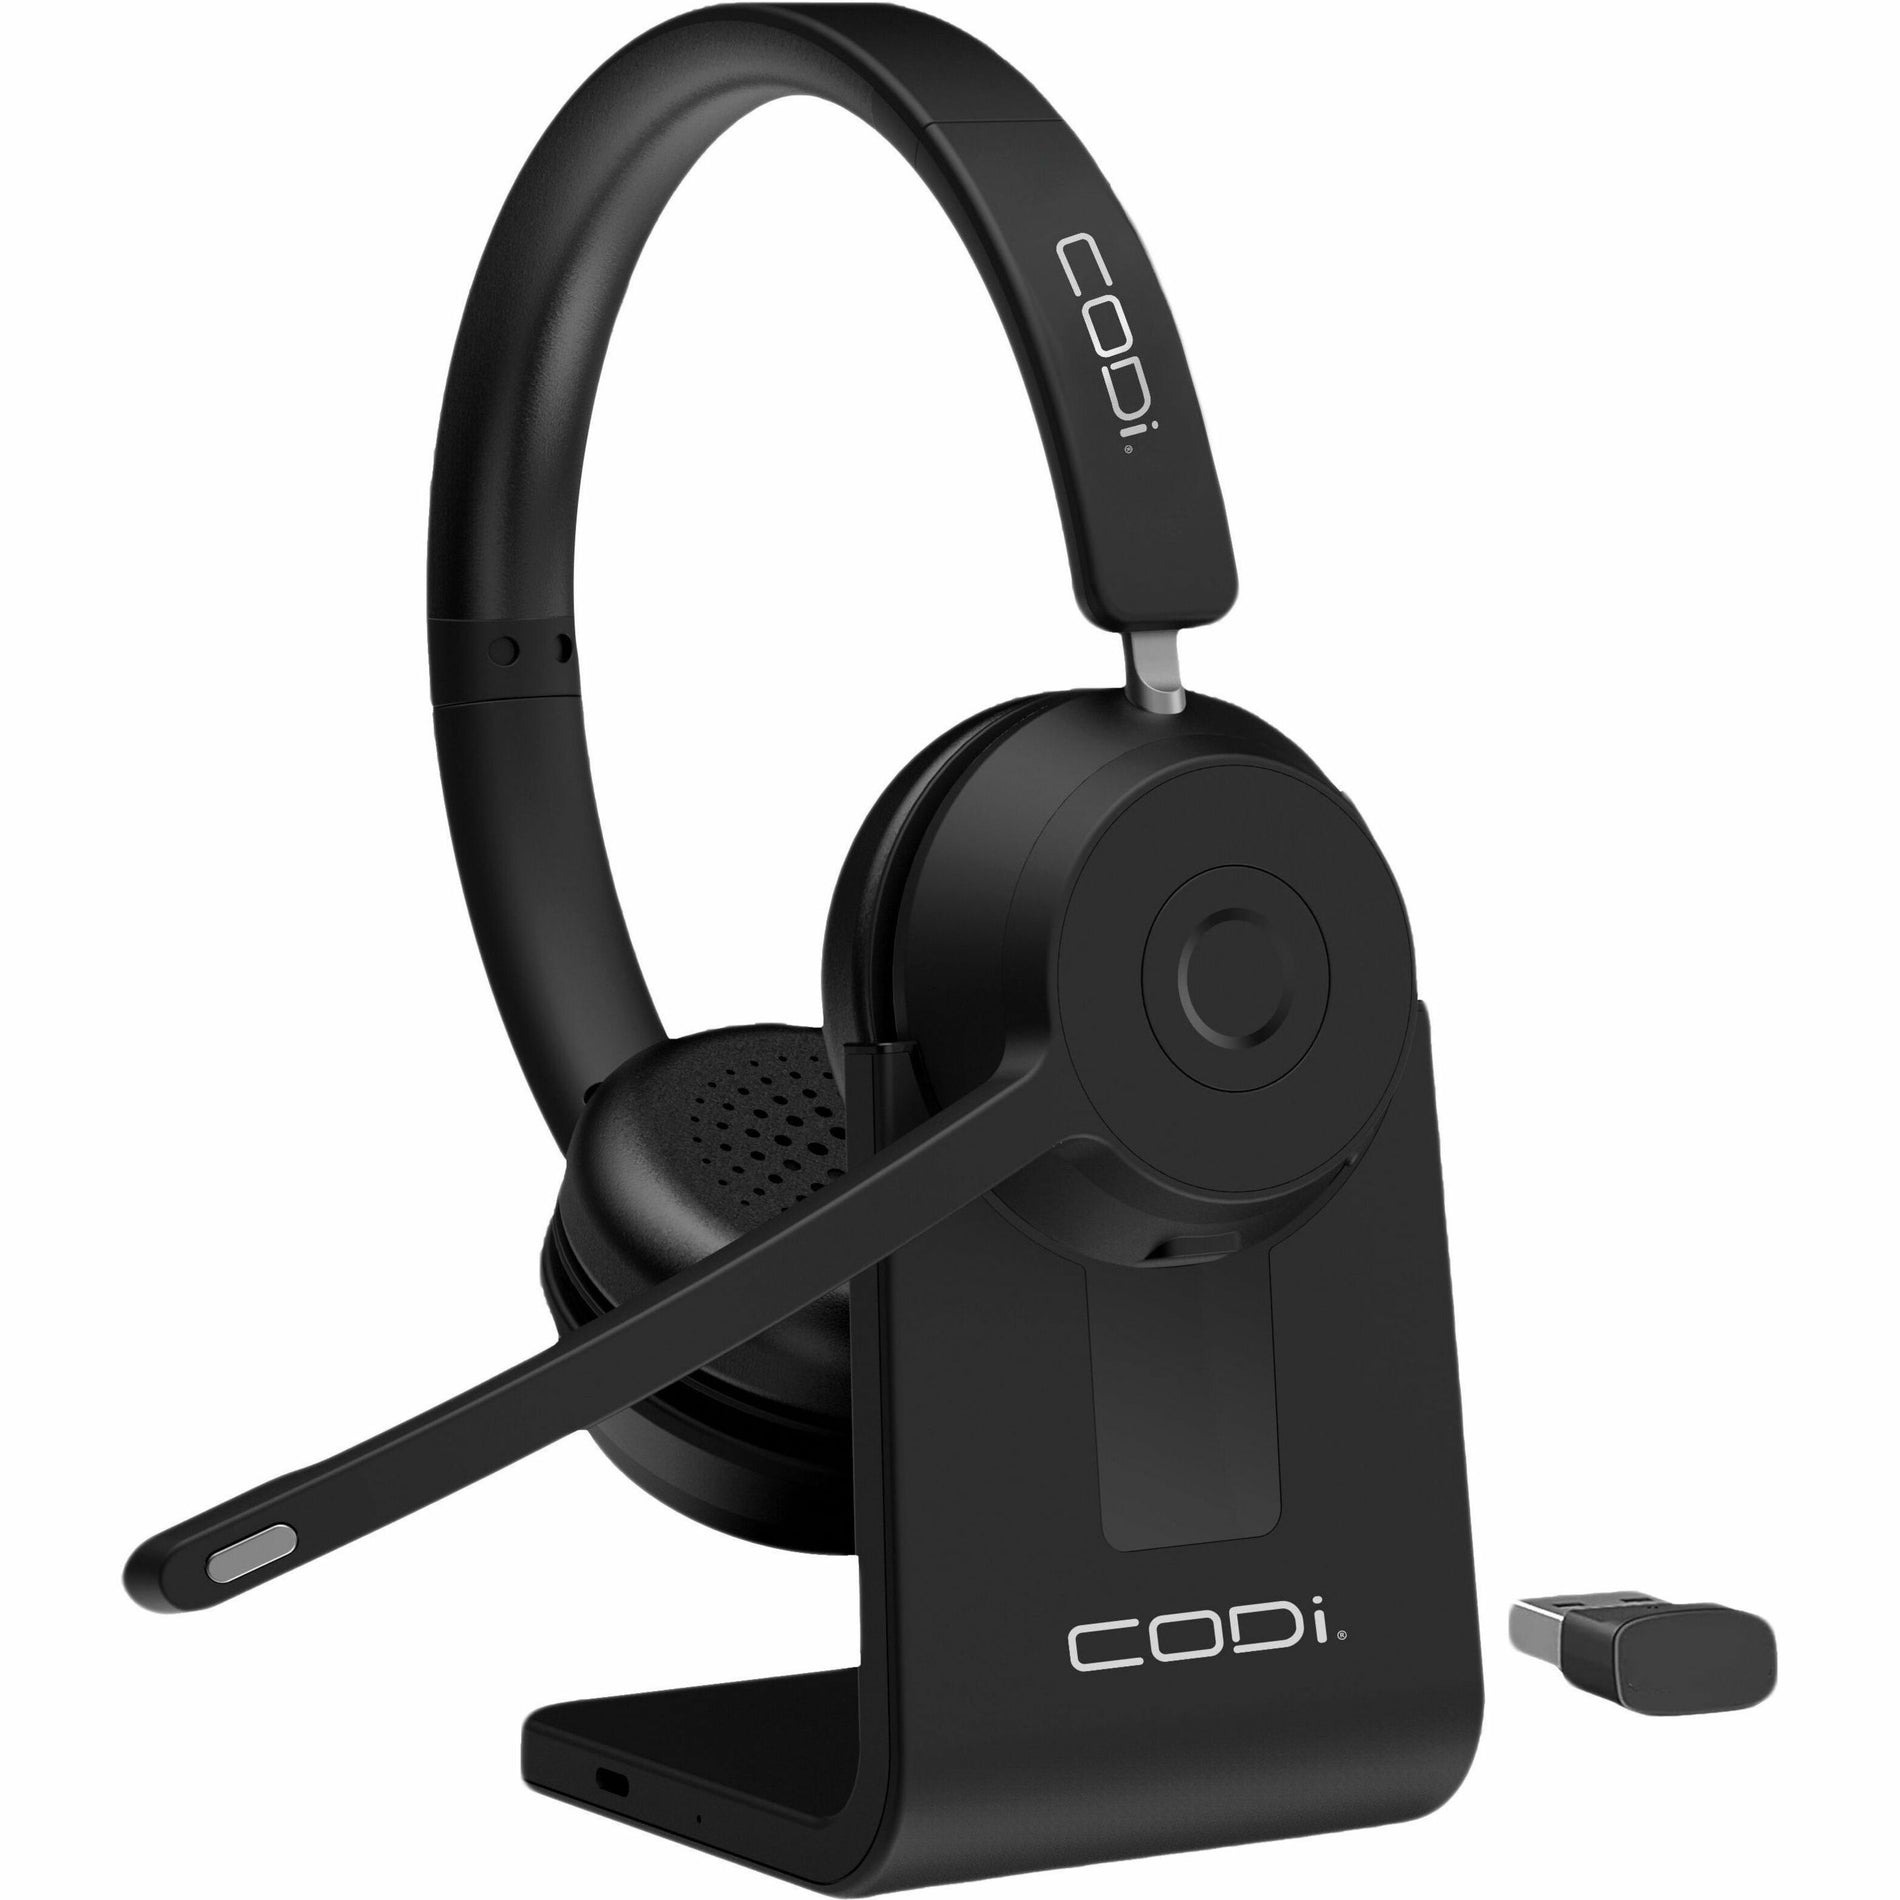 CODi A04619 Bluetooth Wireless Dual Ear Stereo Headset w/ ENC Microphone, Binaural Over-the-head, Noise Cancelling, PC Office Smartphone Notebook Call Center Voice Call